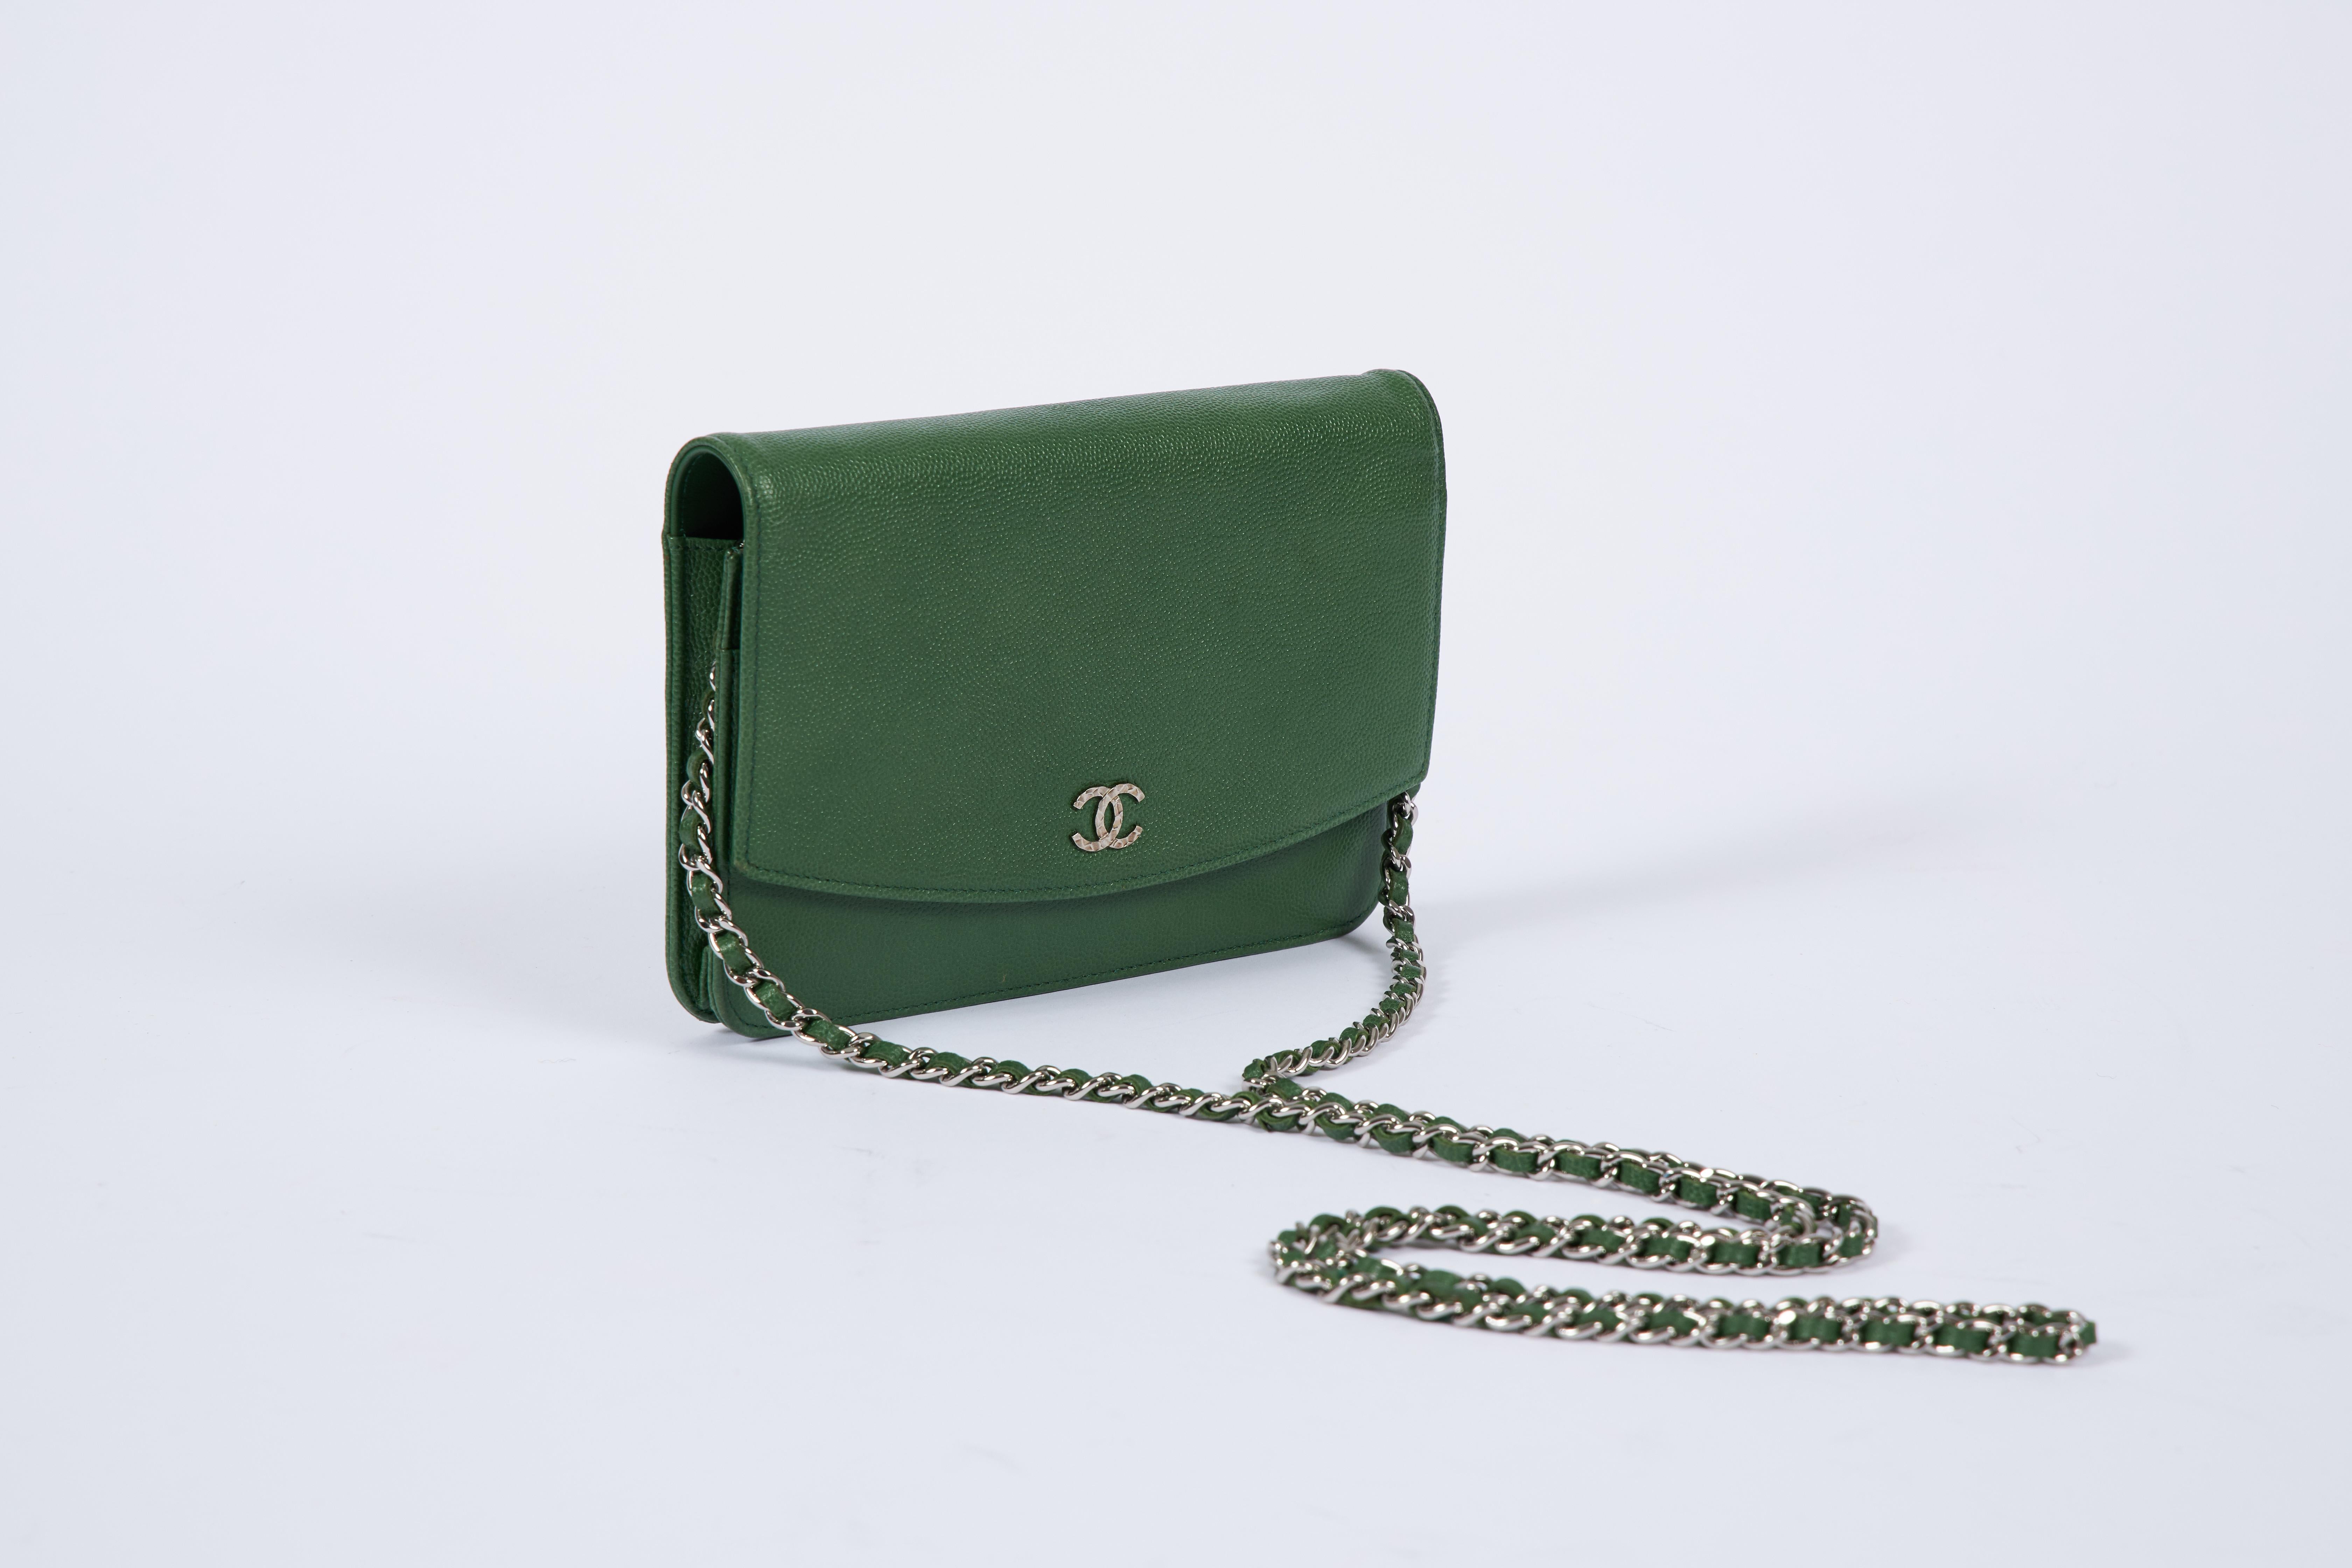 Chanel emerald green caviar wallet on a chain cross body bag. Comes with hologram and original box.